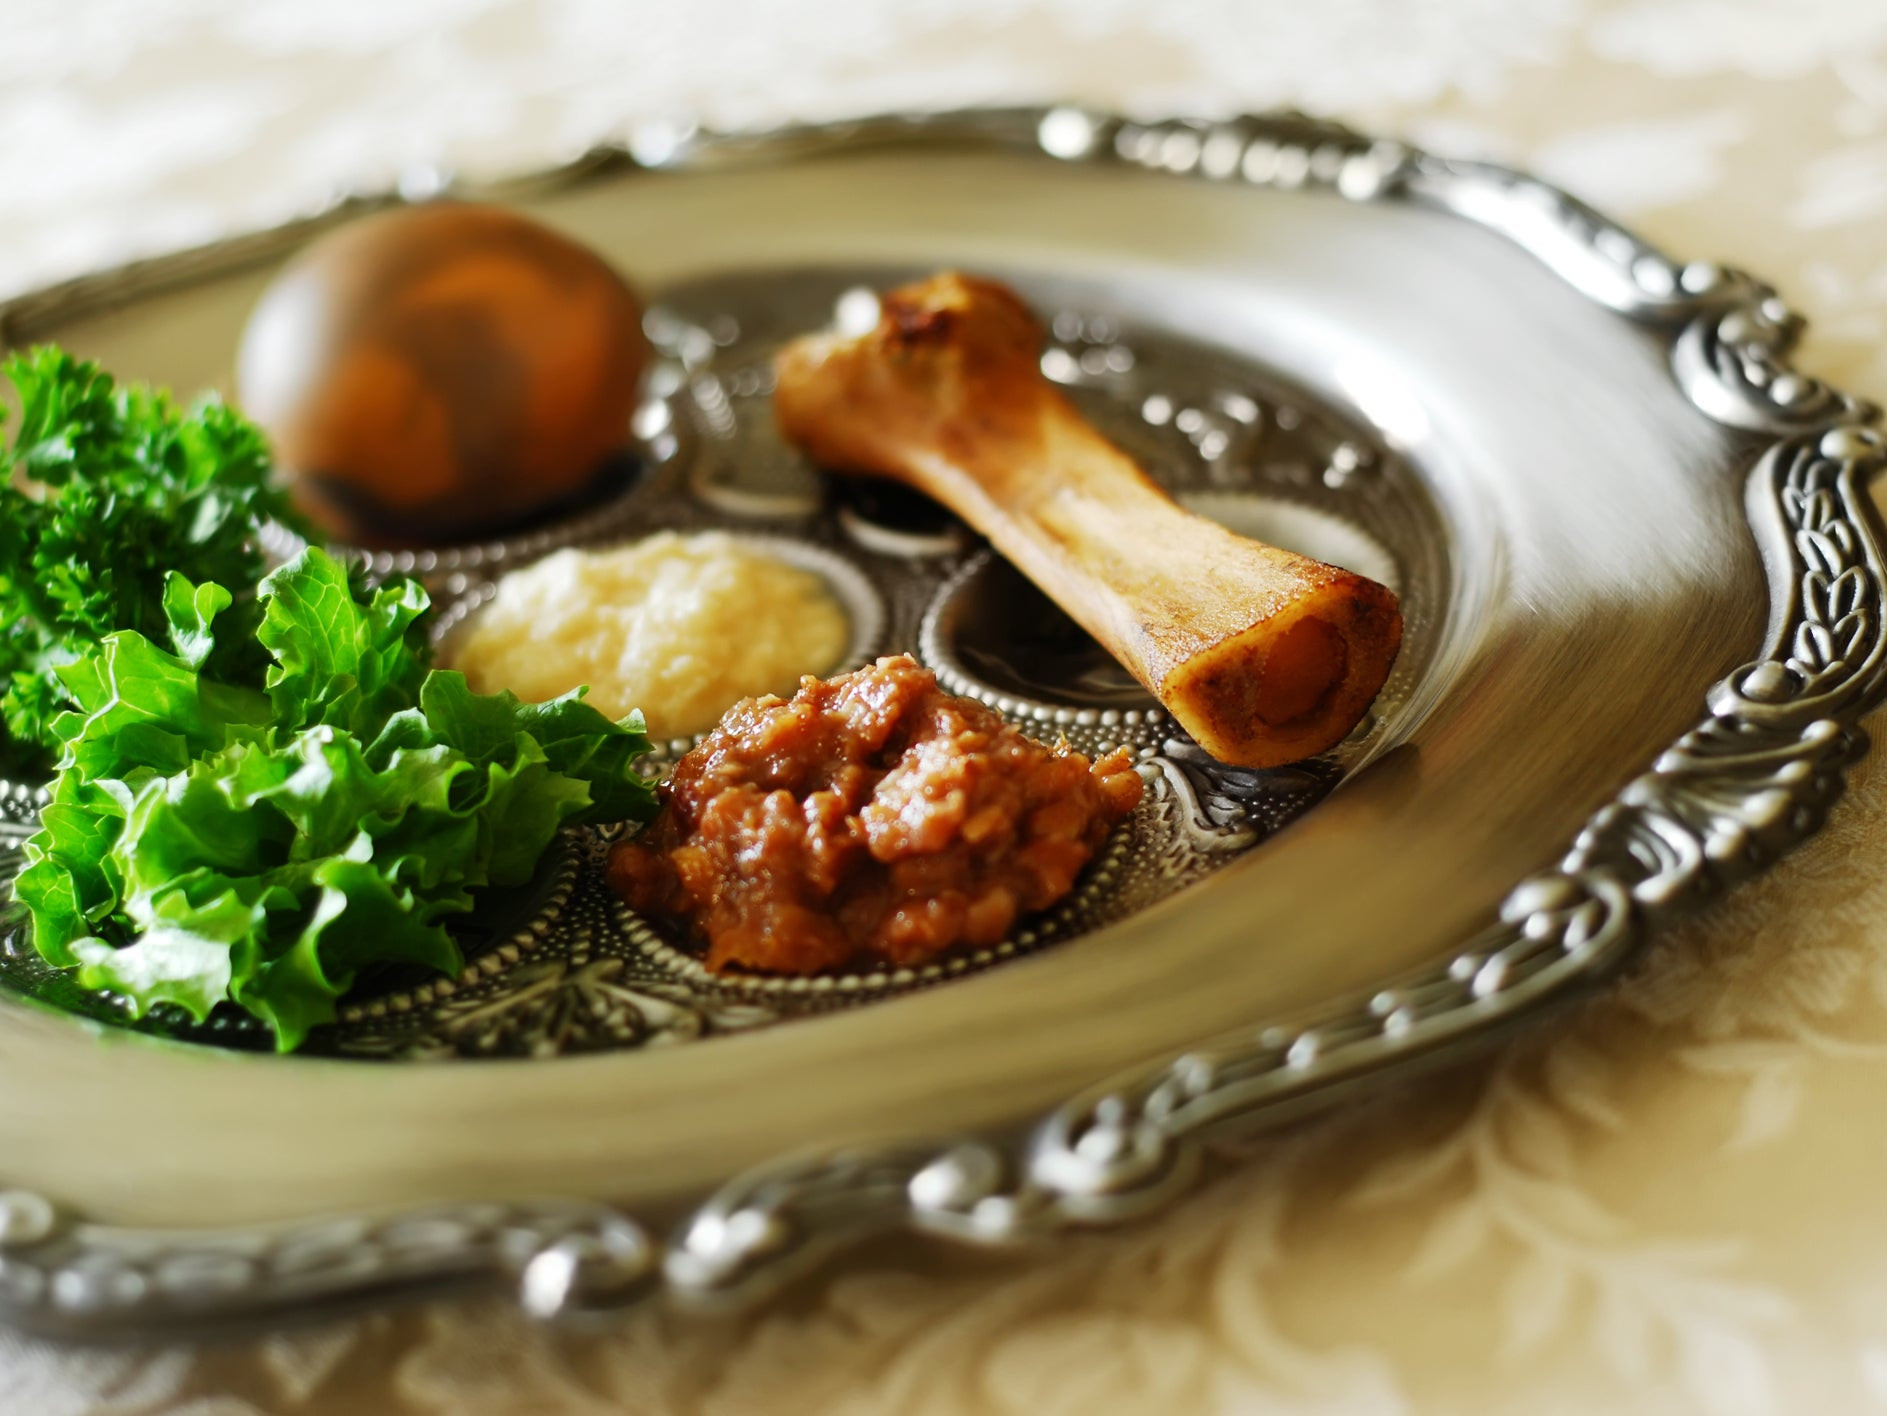 Passover Food Meaning
 Passover 2019 The meaning of the foods eaten during the